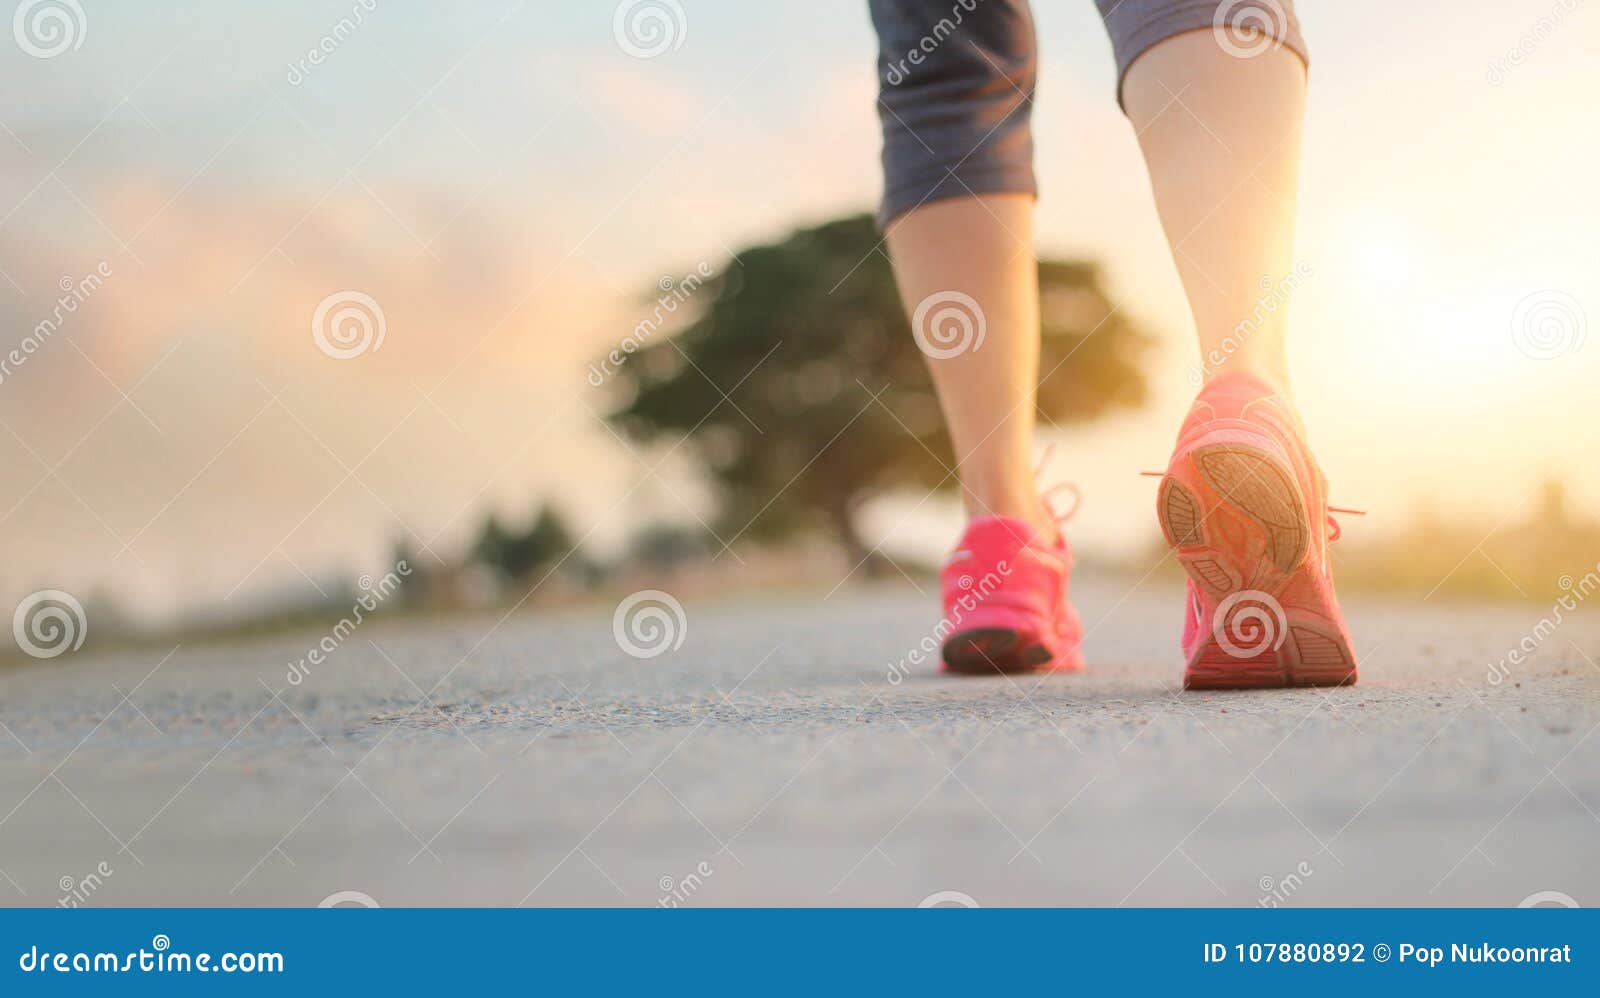 athlete woman walking exercise on rural road in sunset background, healthy and lifestyle concept